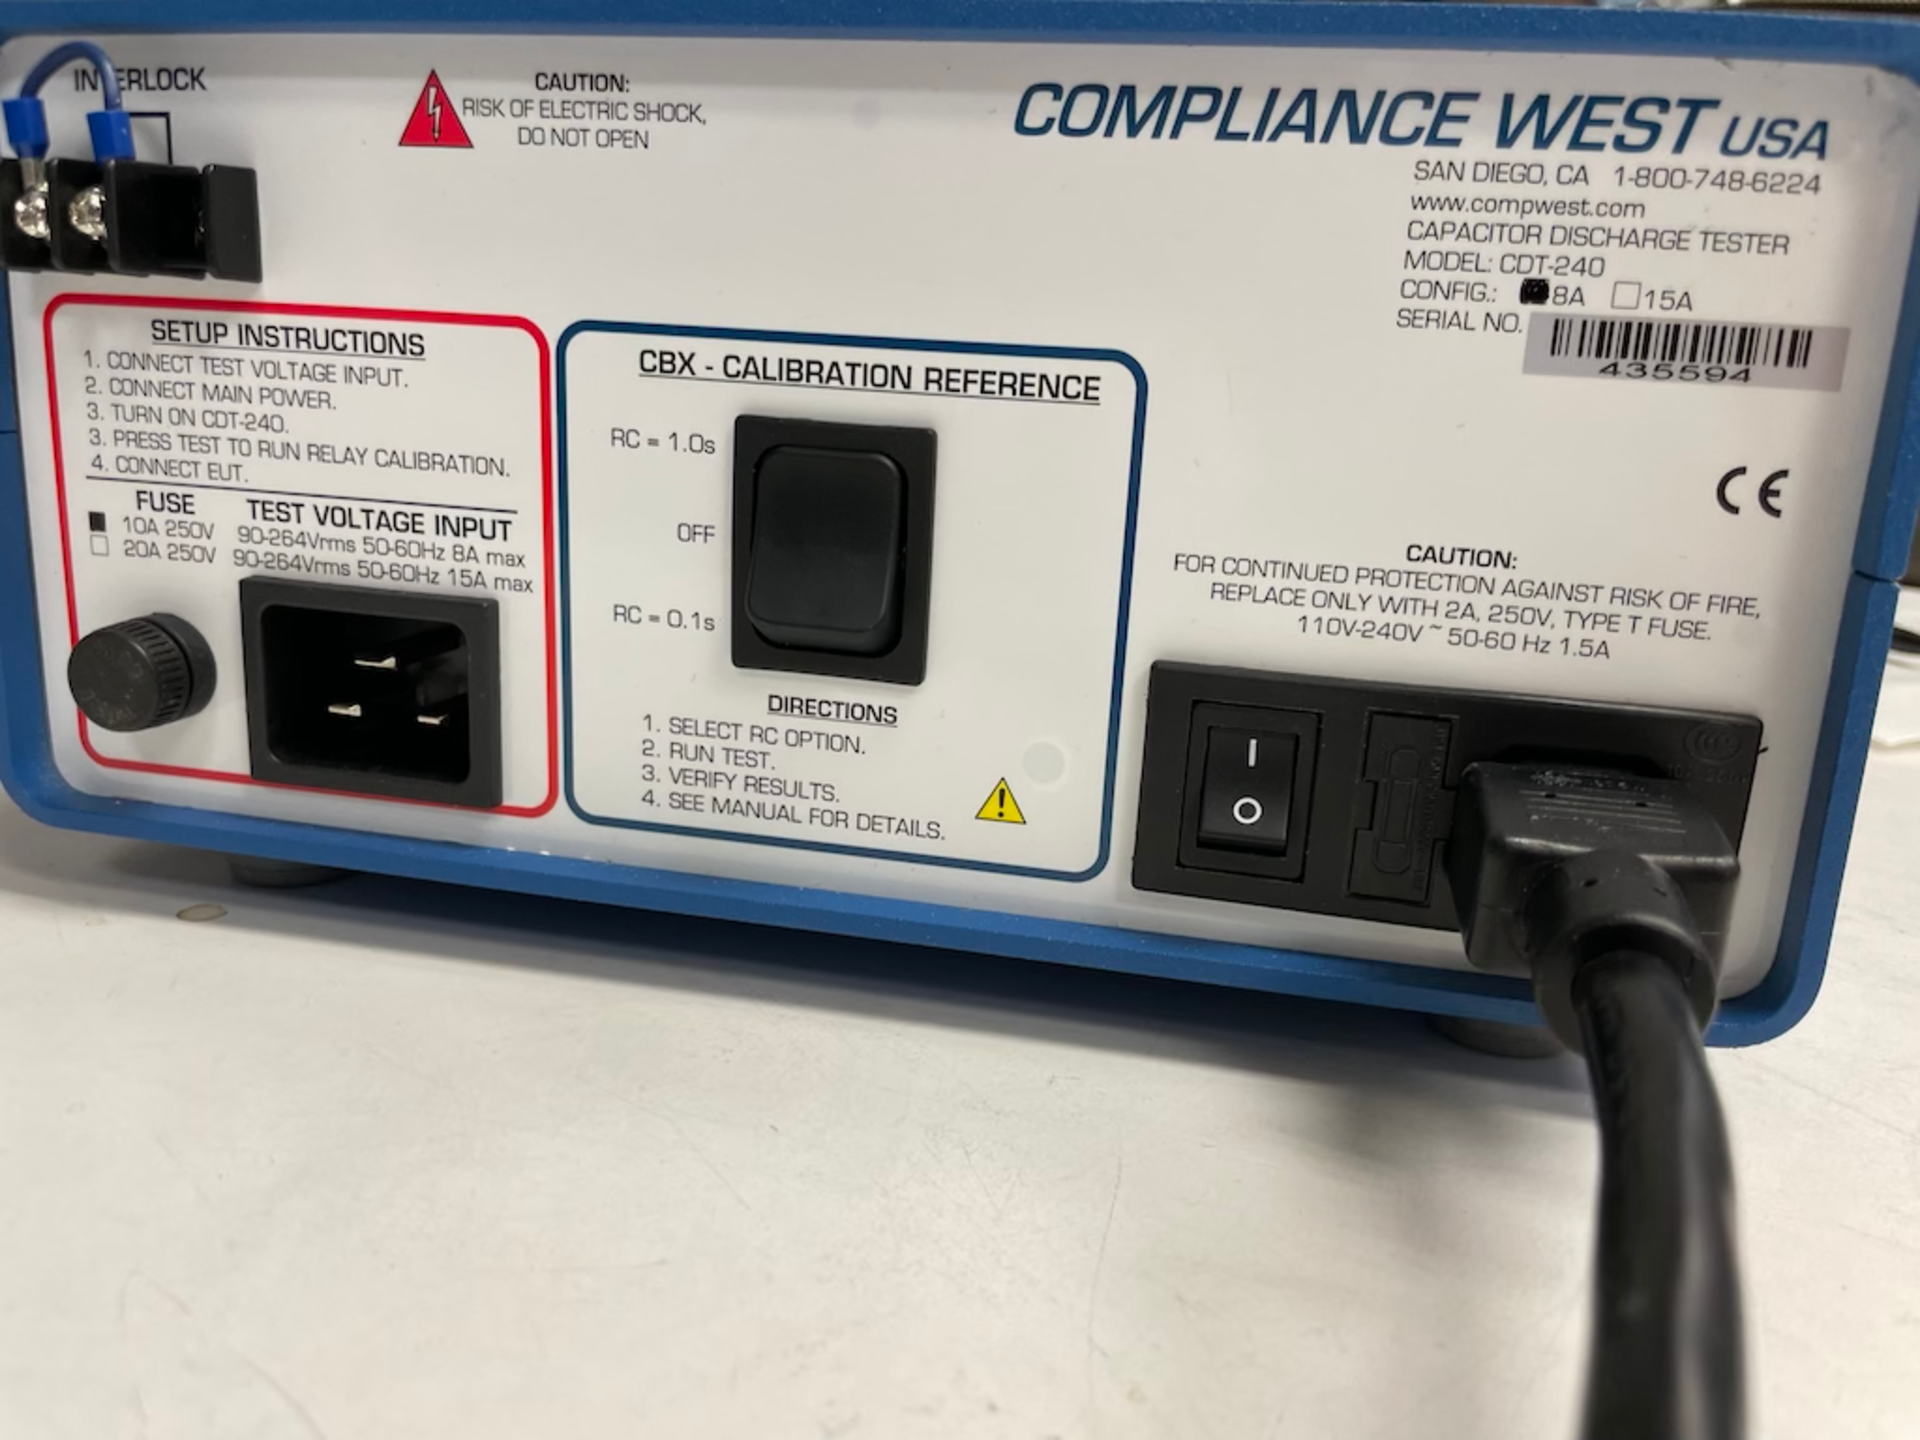 Compliance West CDT-240 Capacitor Discharge Tester SN/ 435594 - Located in Santa Clara, CA - Image 5 of 5